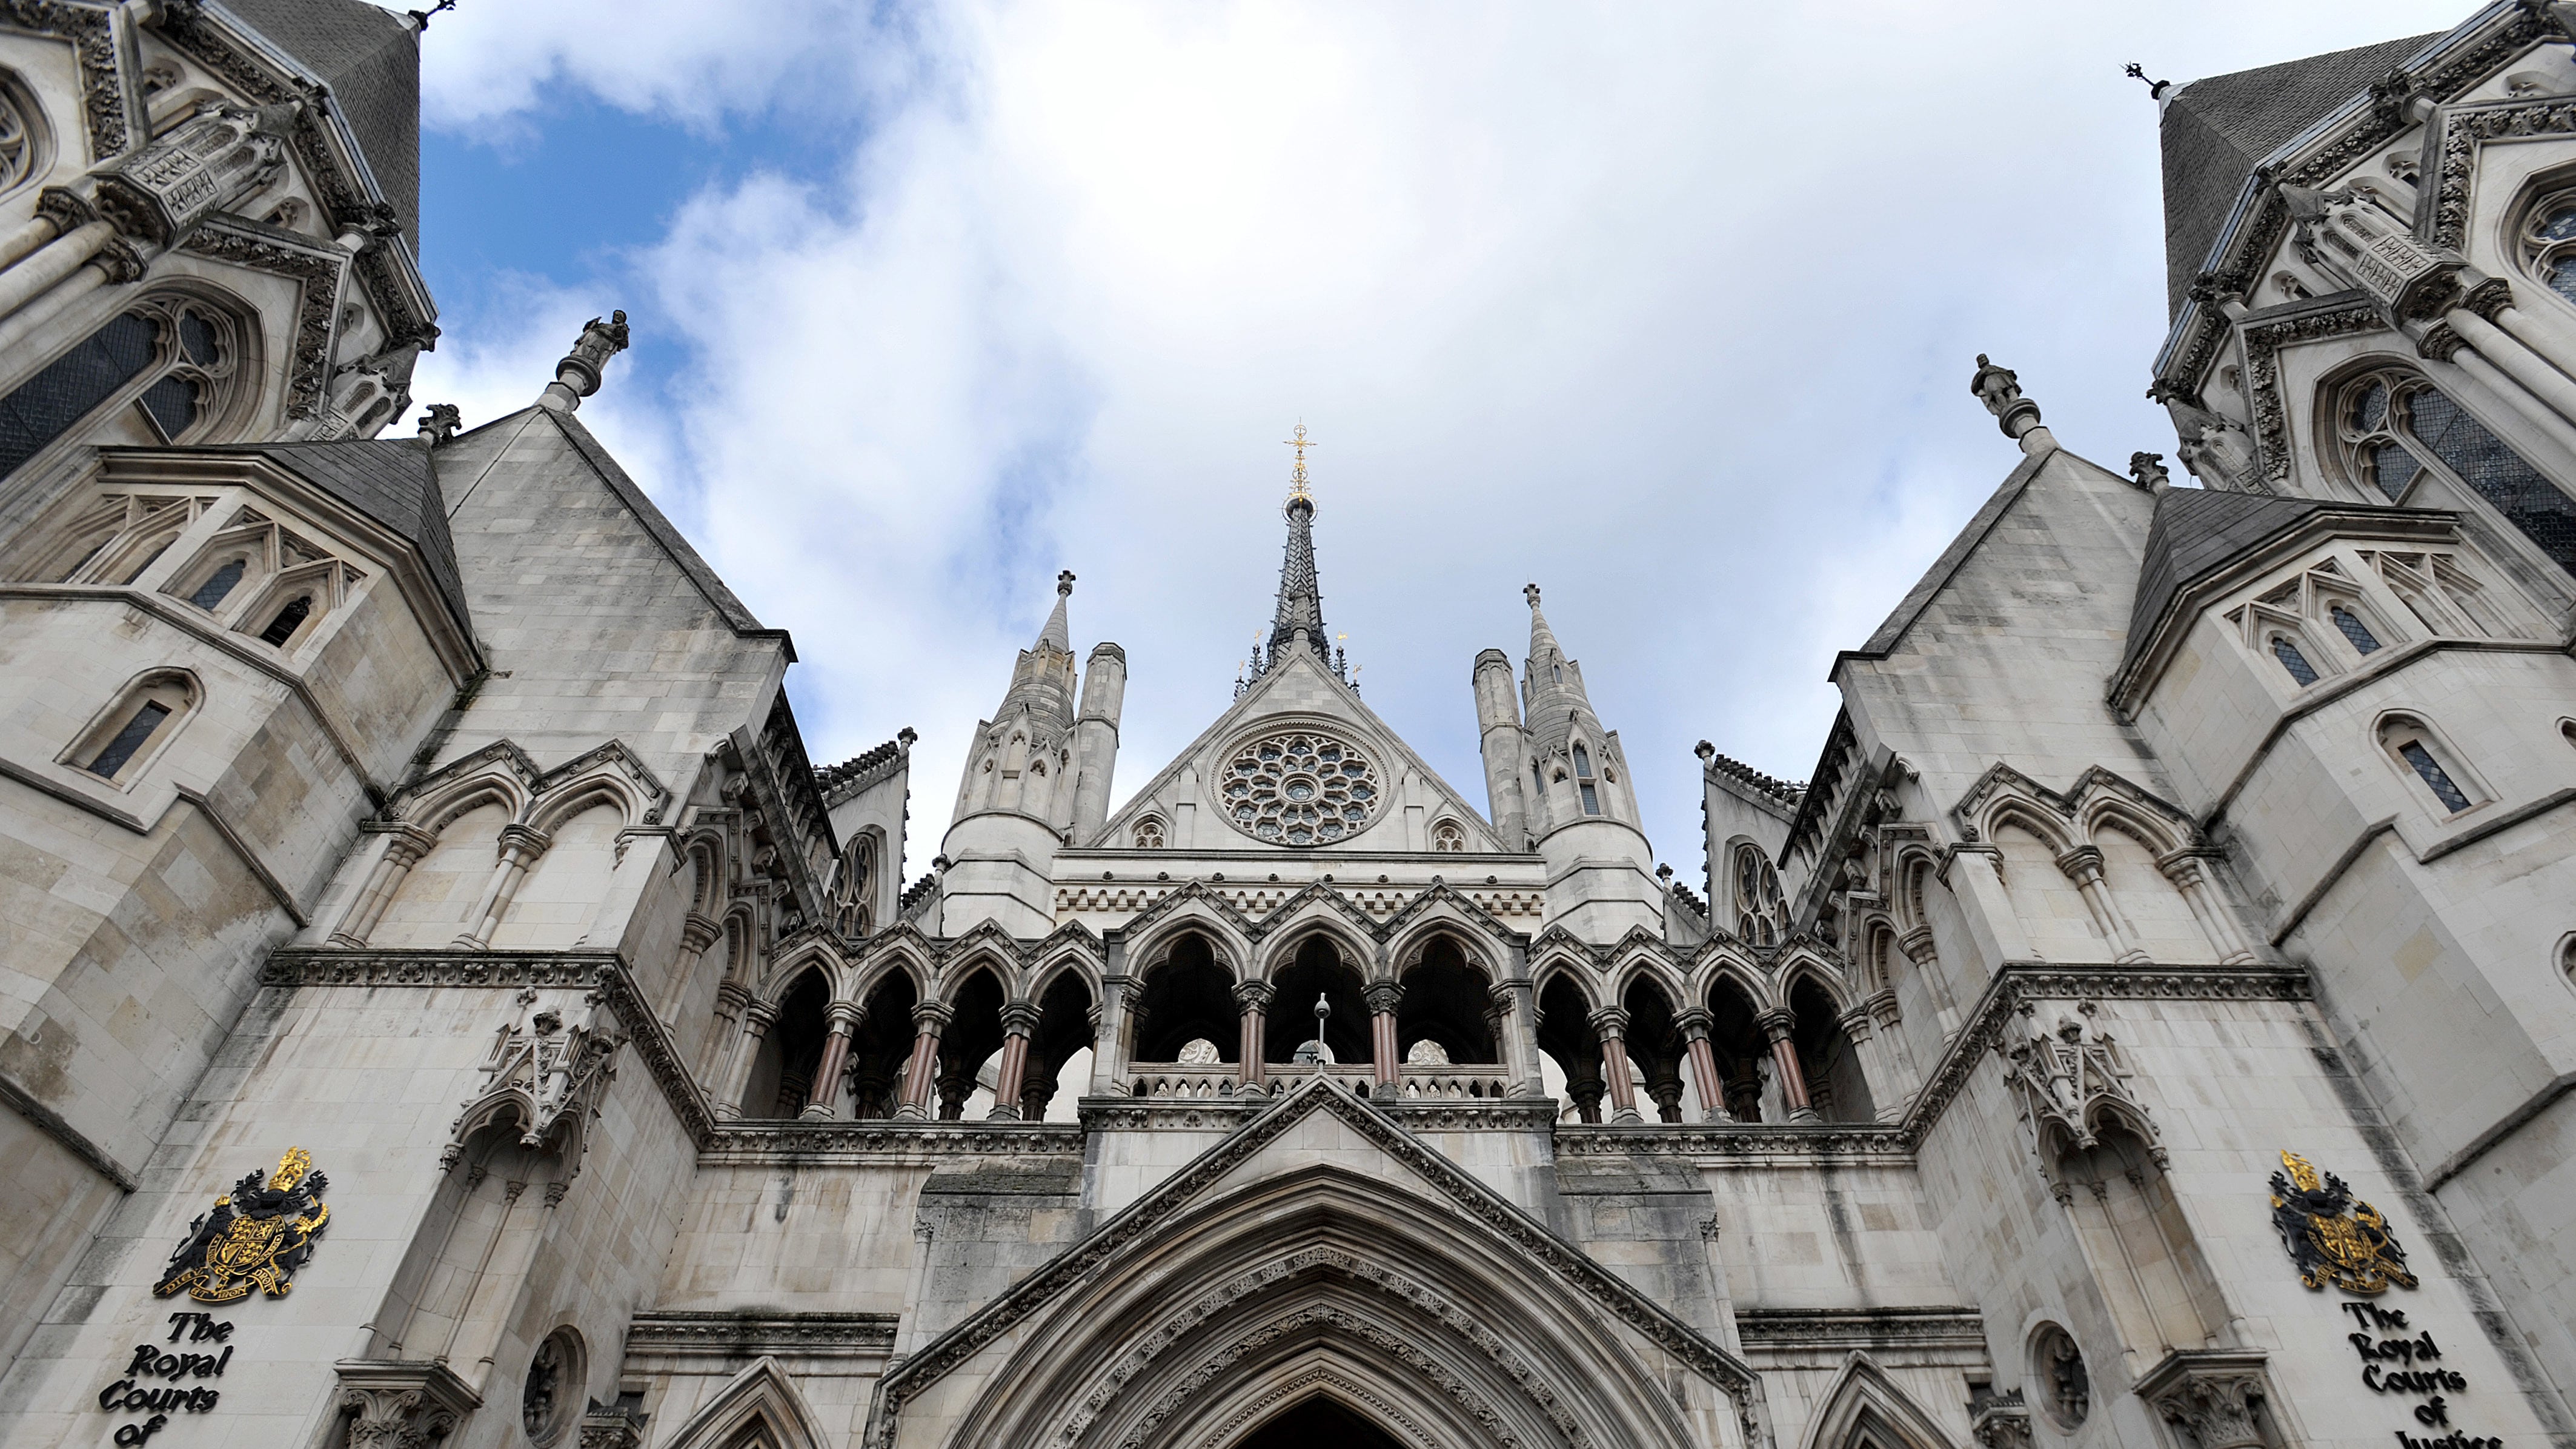 The High Court ruled a decision by the Home Office to ditch previously-accepted recommendations regarding the Windrush scandal was unlawful